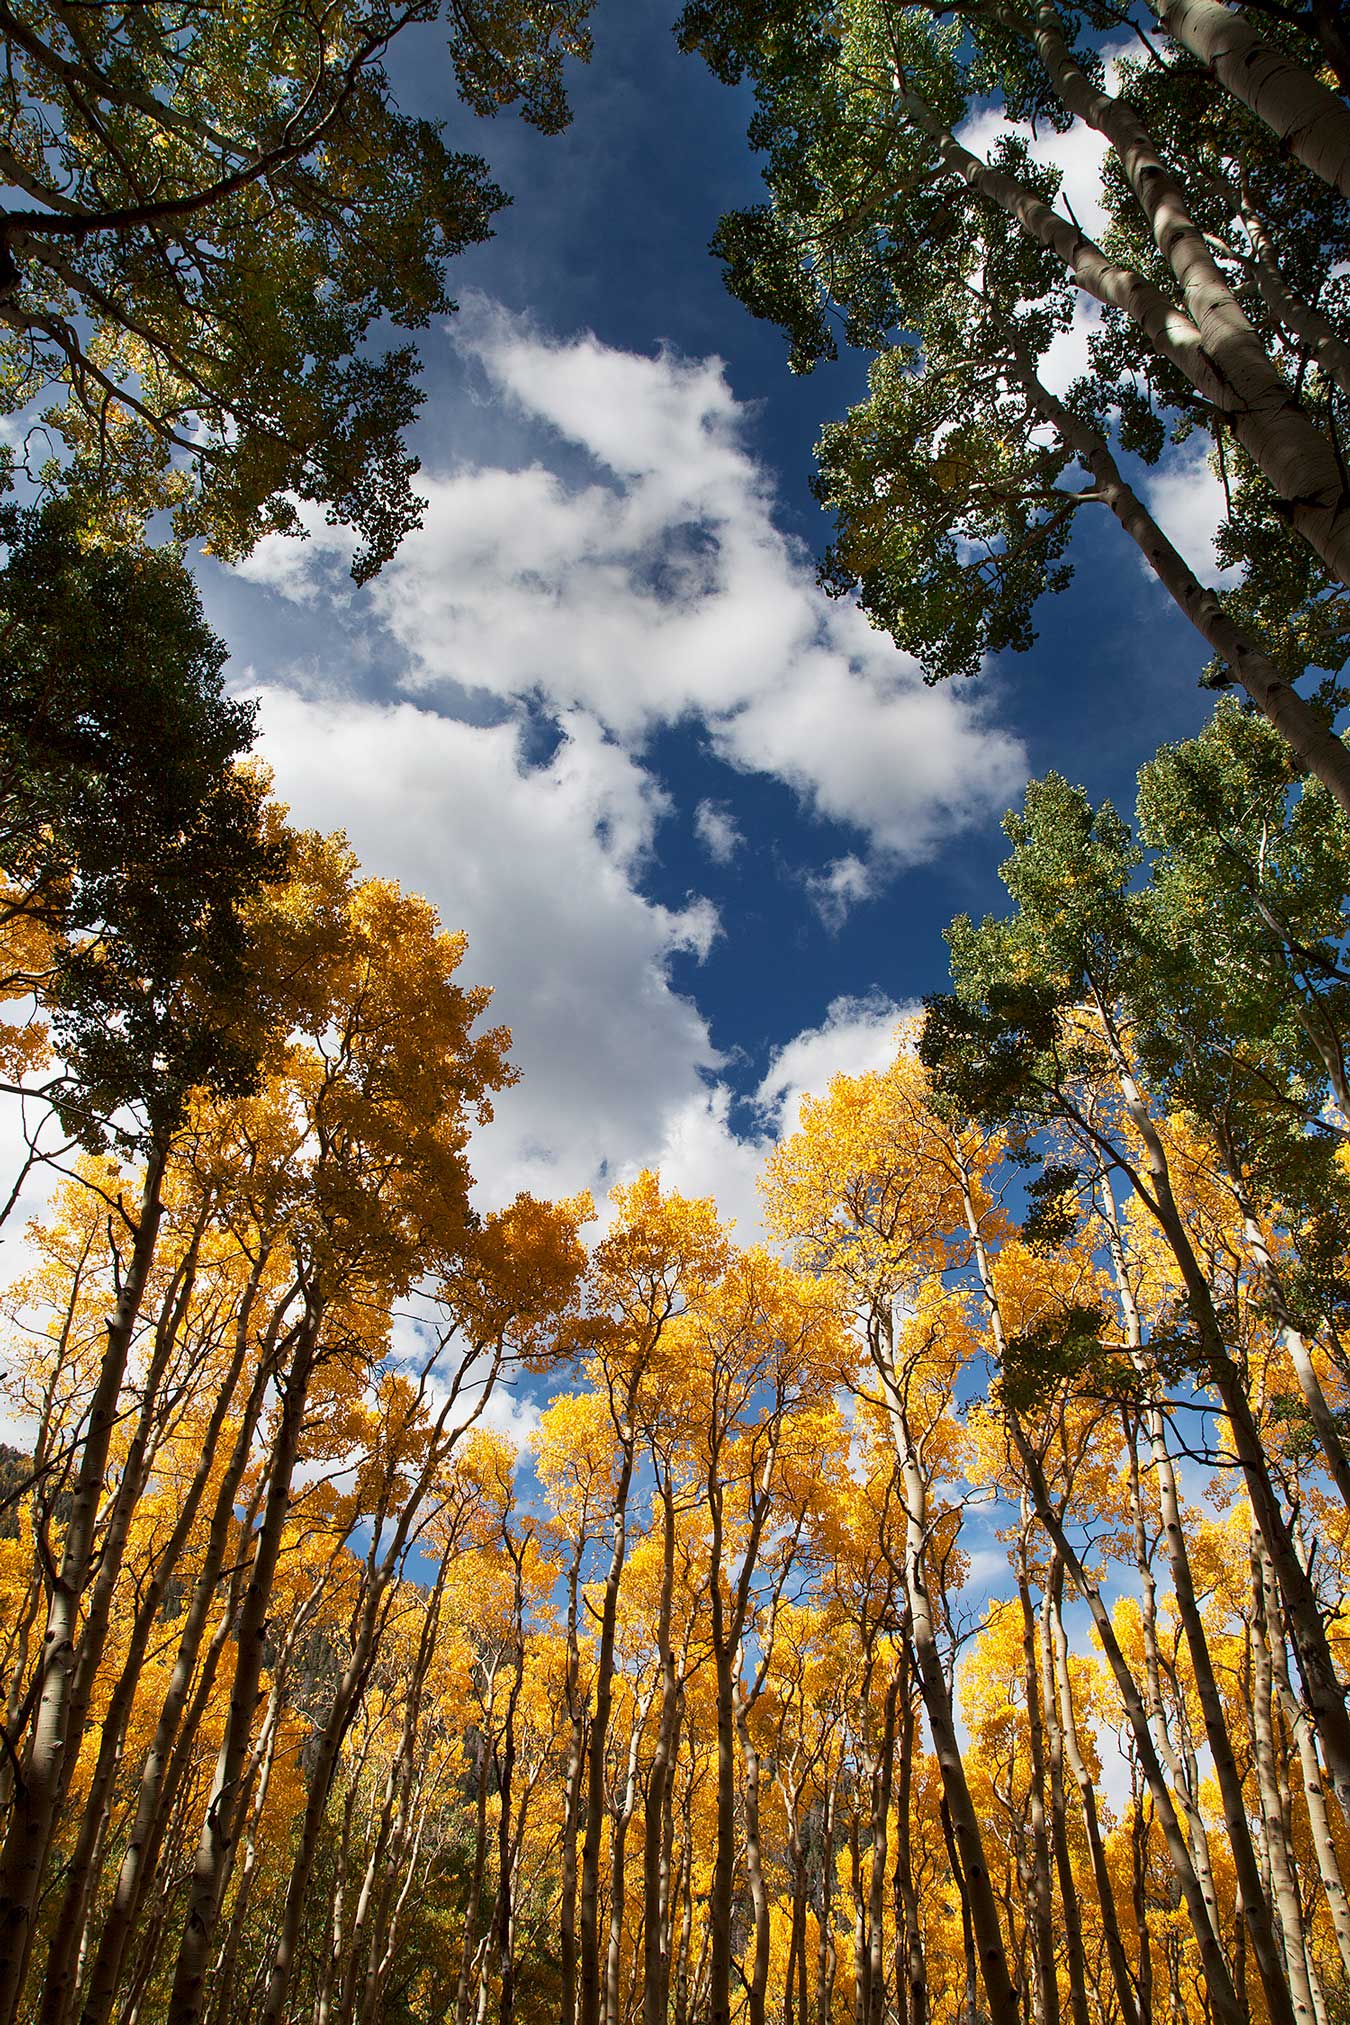 Aspens and other trees with fall colors in Lockett Meadow in the San Francisco Peaks of northern Arizona